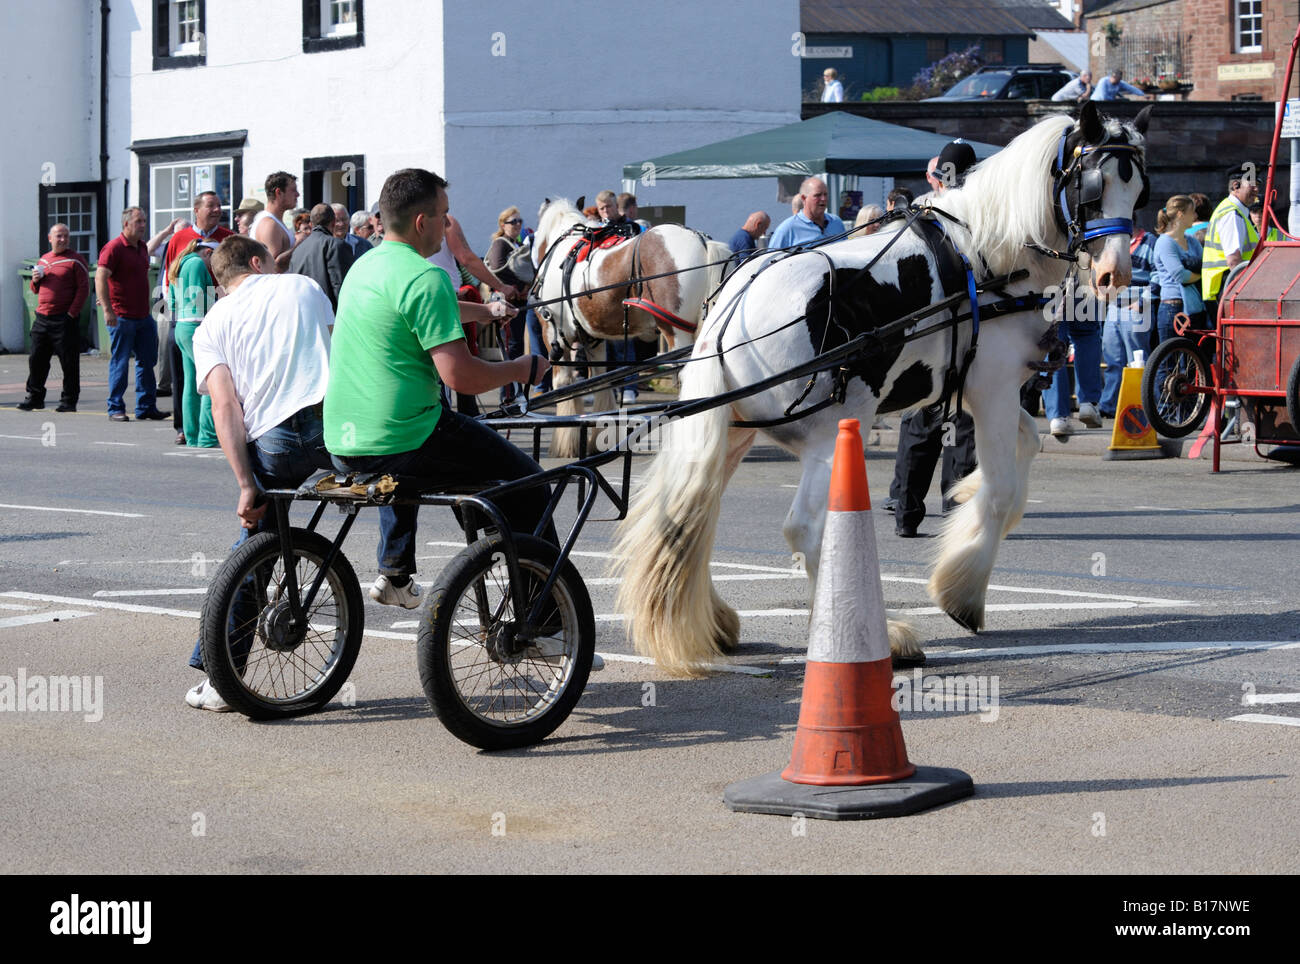 Gypsy travellers with trotting horse and trap. Appleby Horse Fair. Appleby-in-Westmorland, Cumbria, England, United Kingdom. Stock Photo